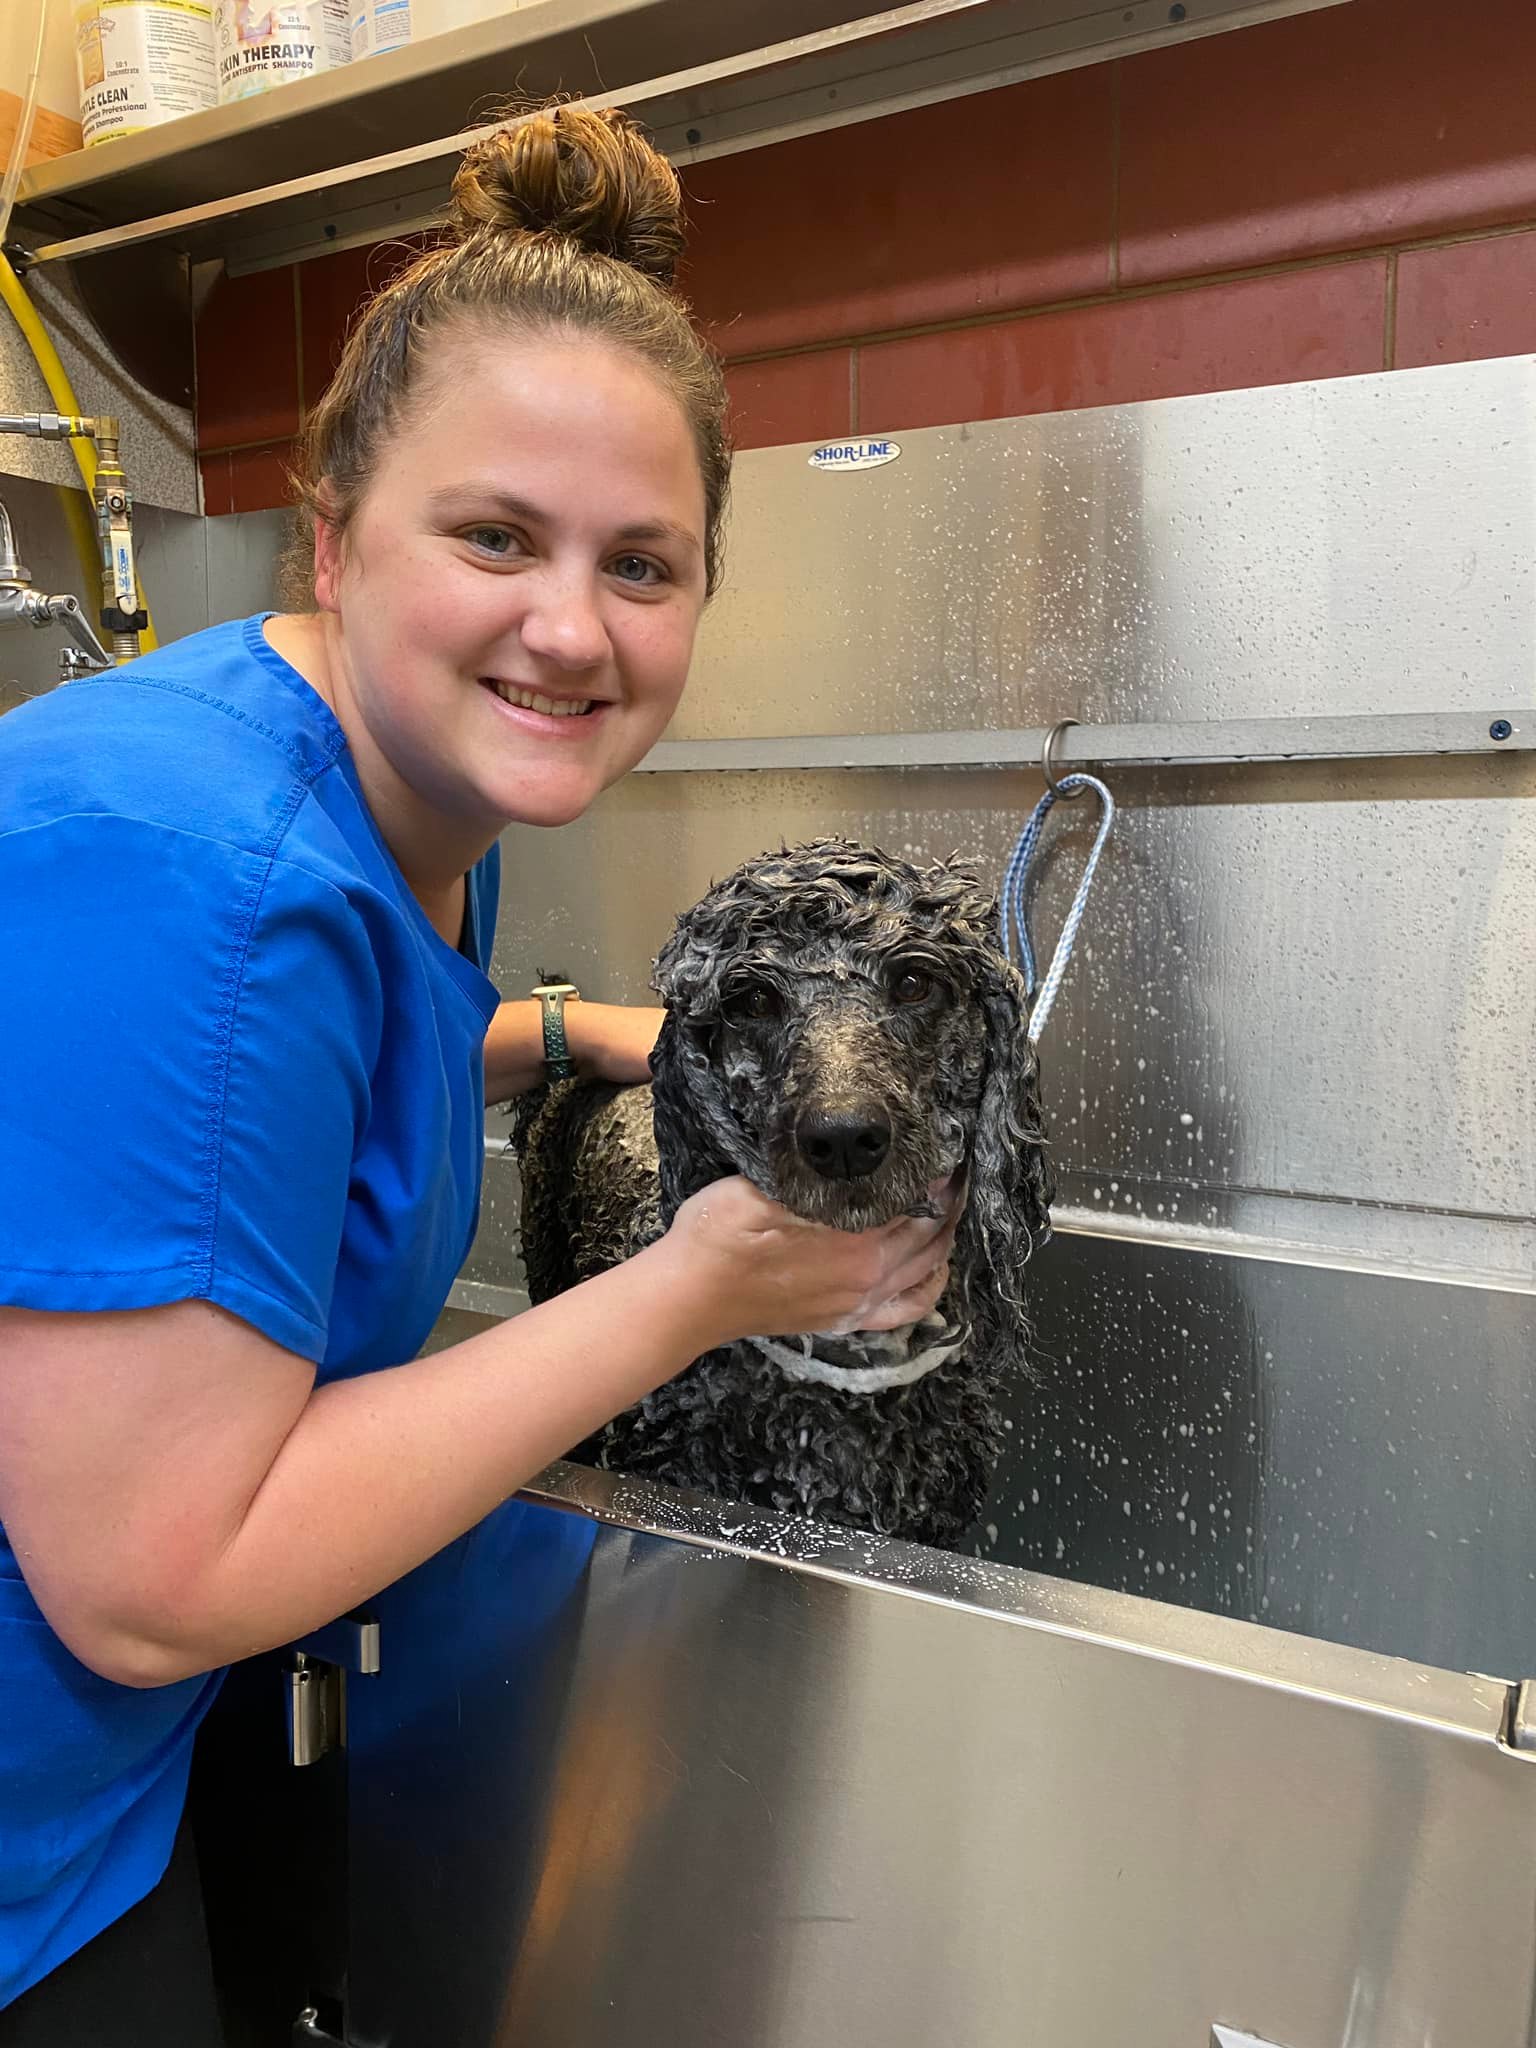 a person washing a dog in a sink